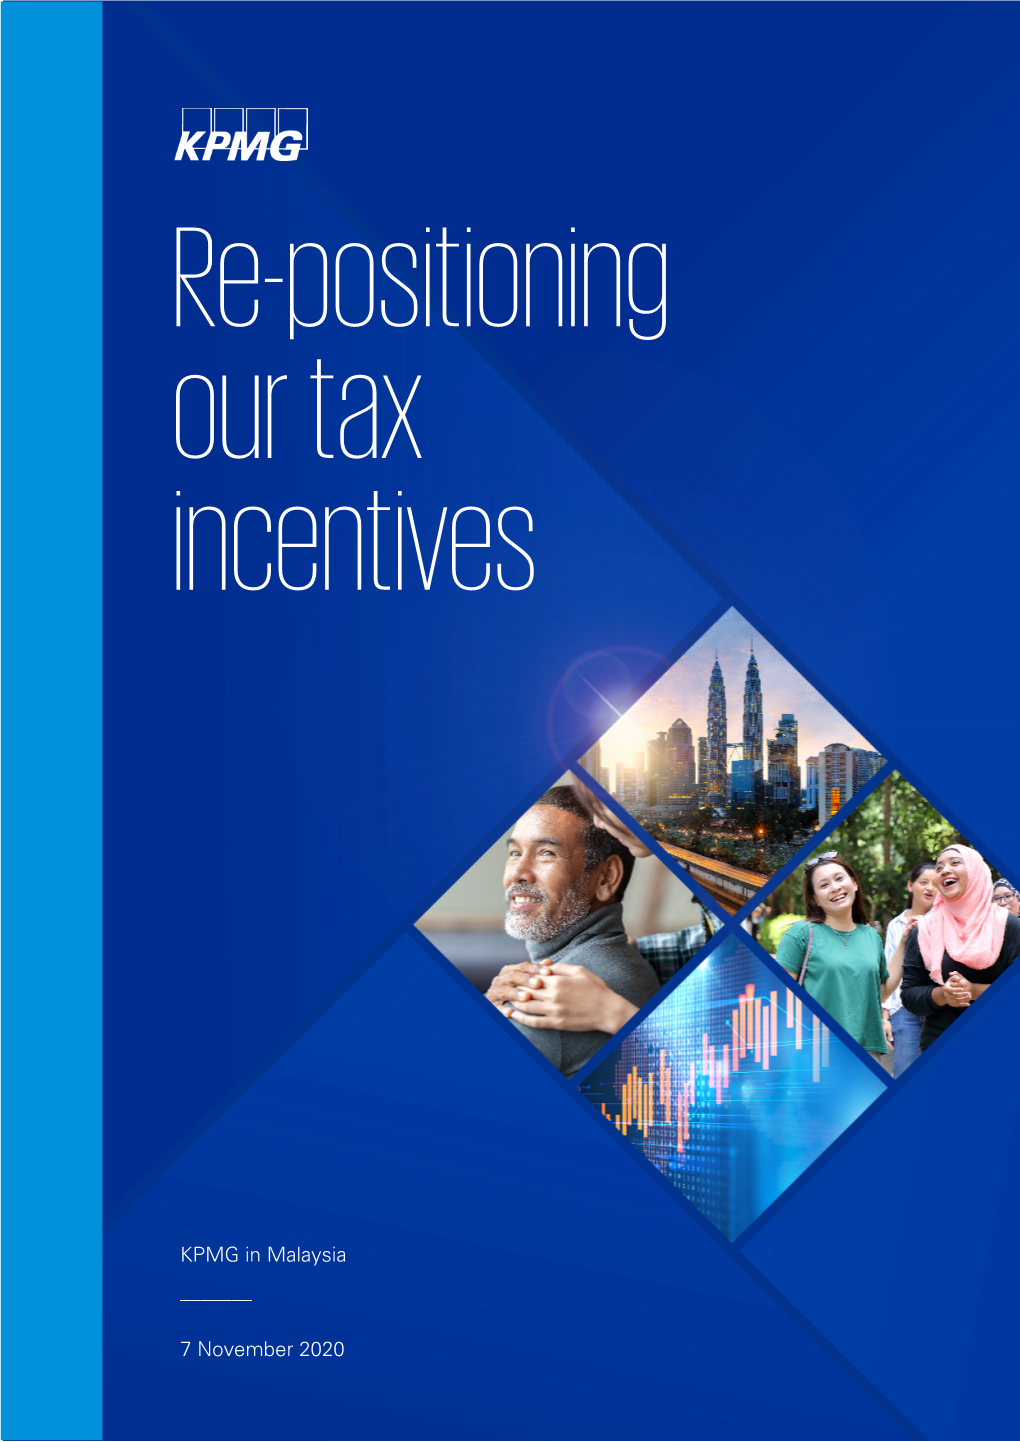 Re-Positioning Our Tax Incentives 2 Overview and Commentary